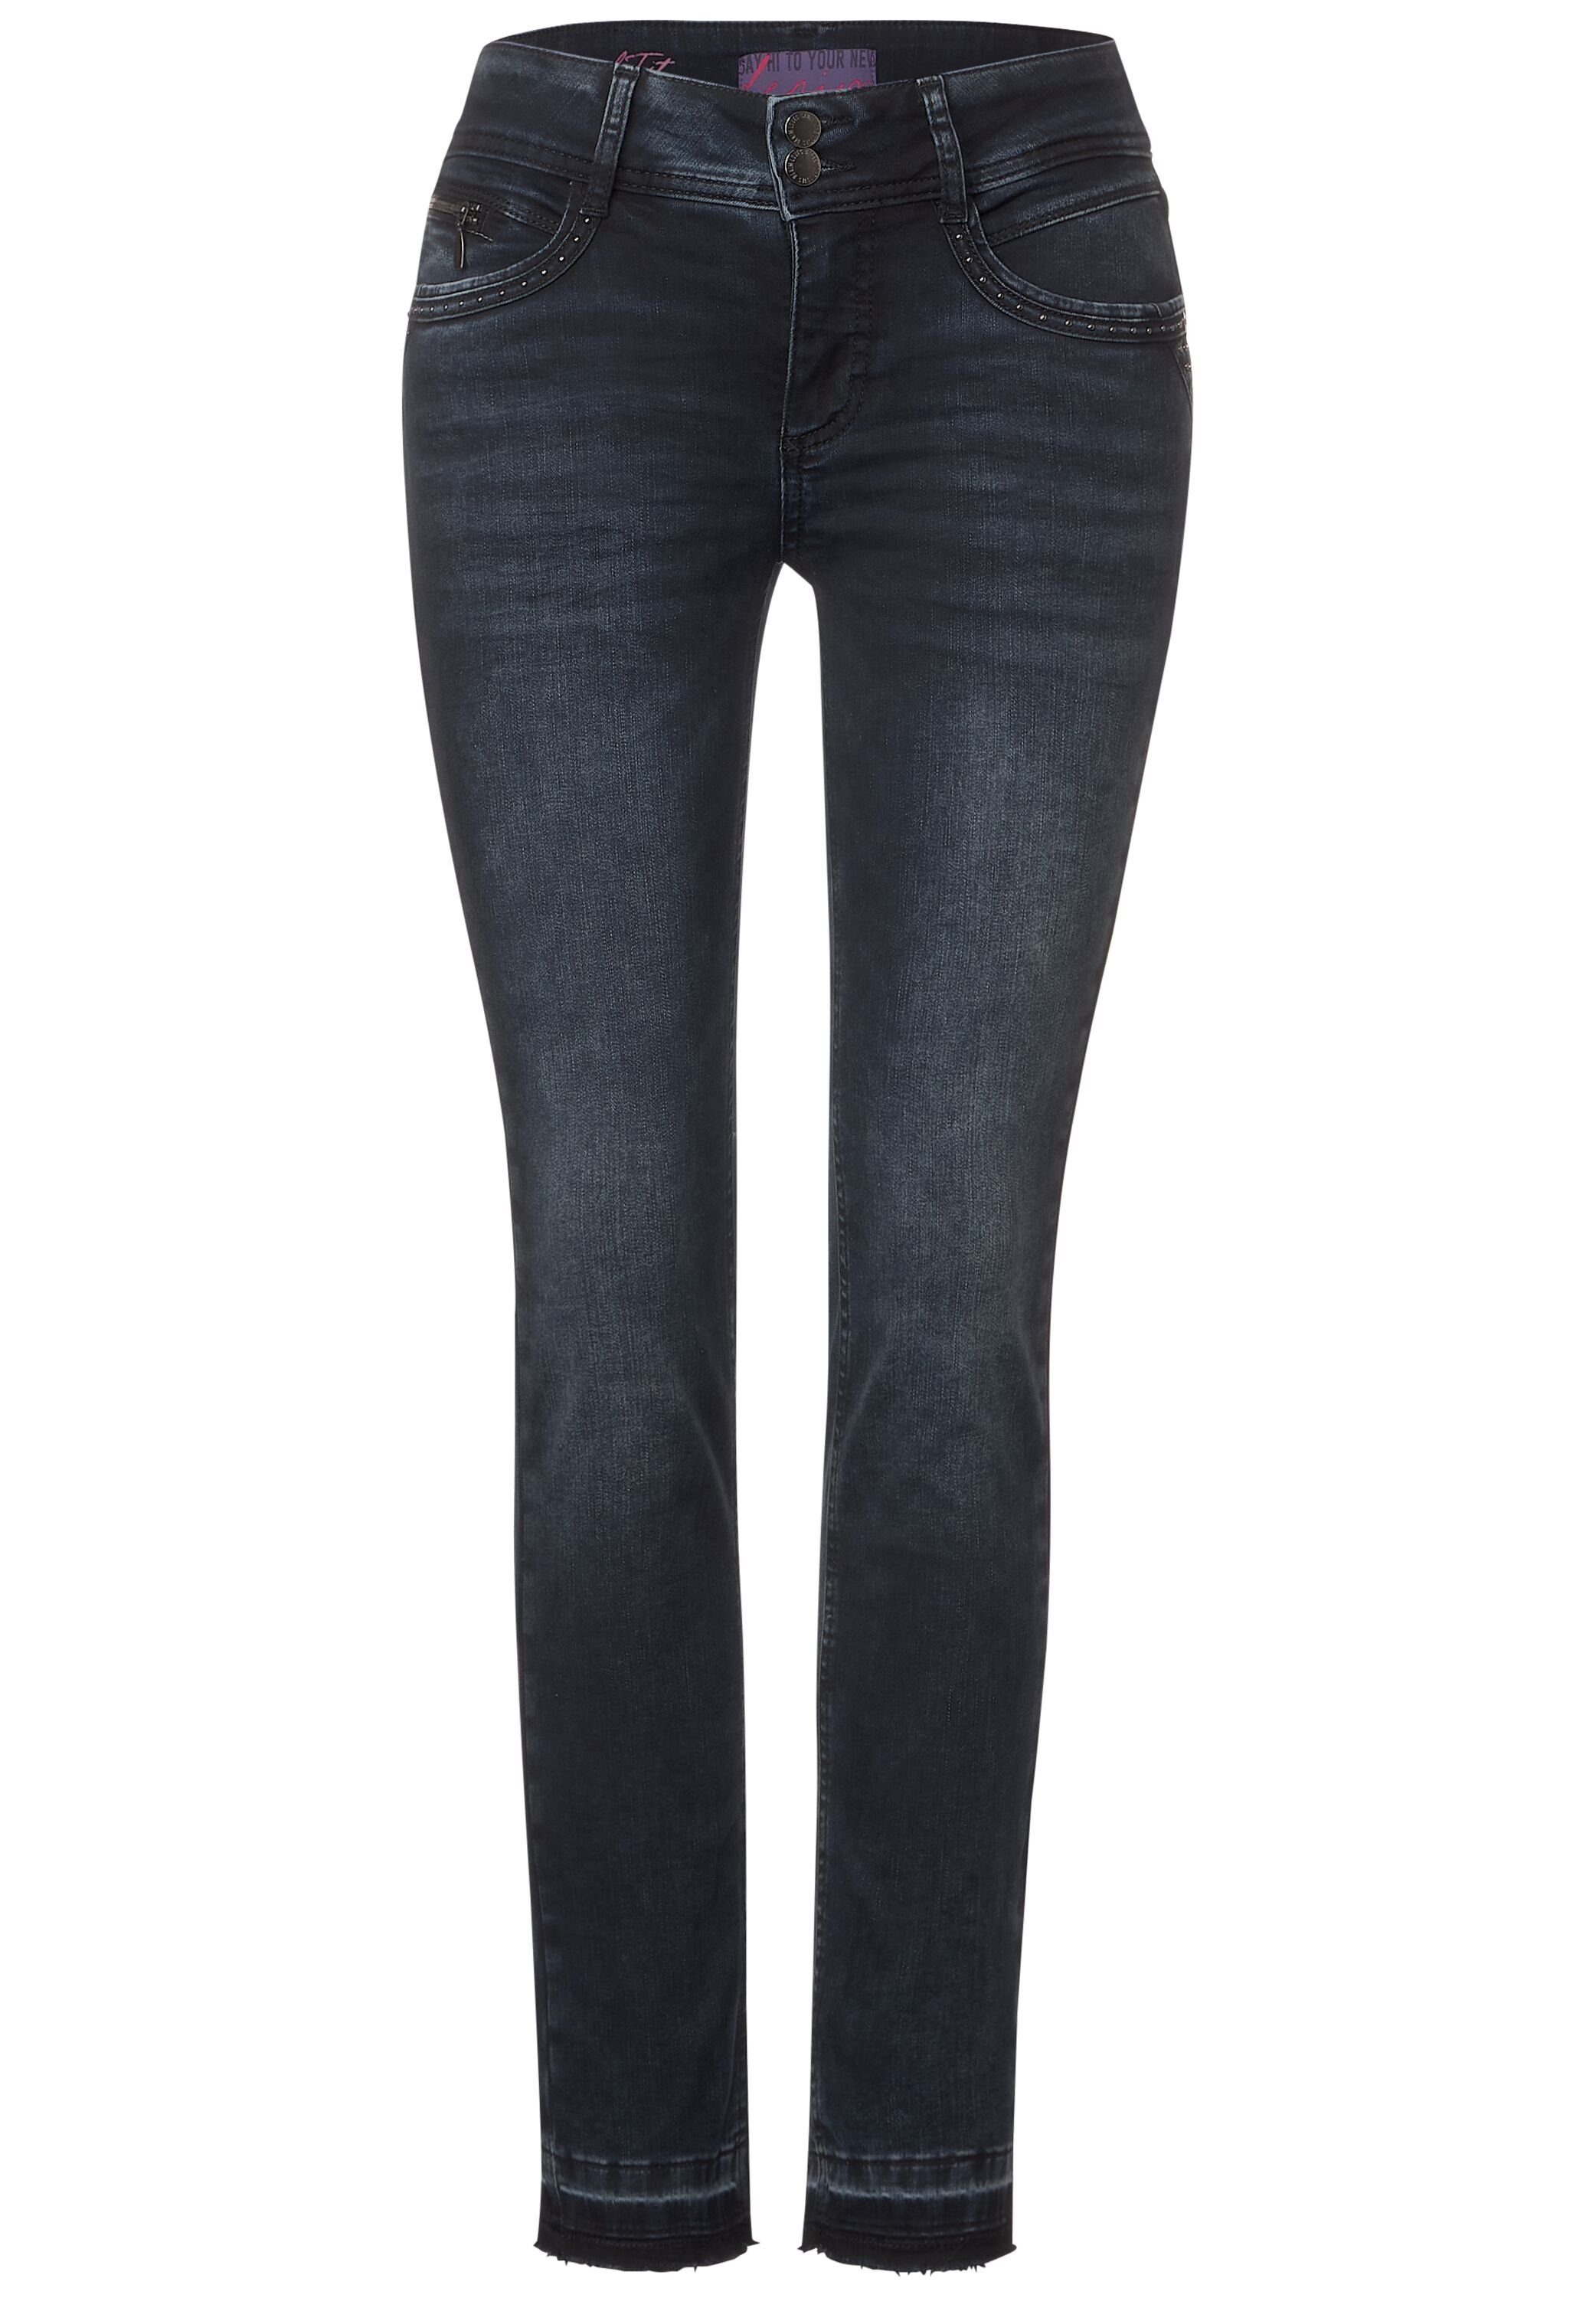 STREET ONE Waist Jeans Middle Gerade